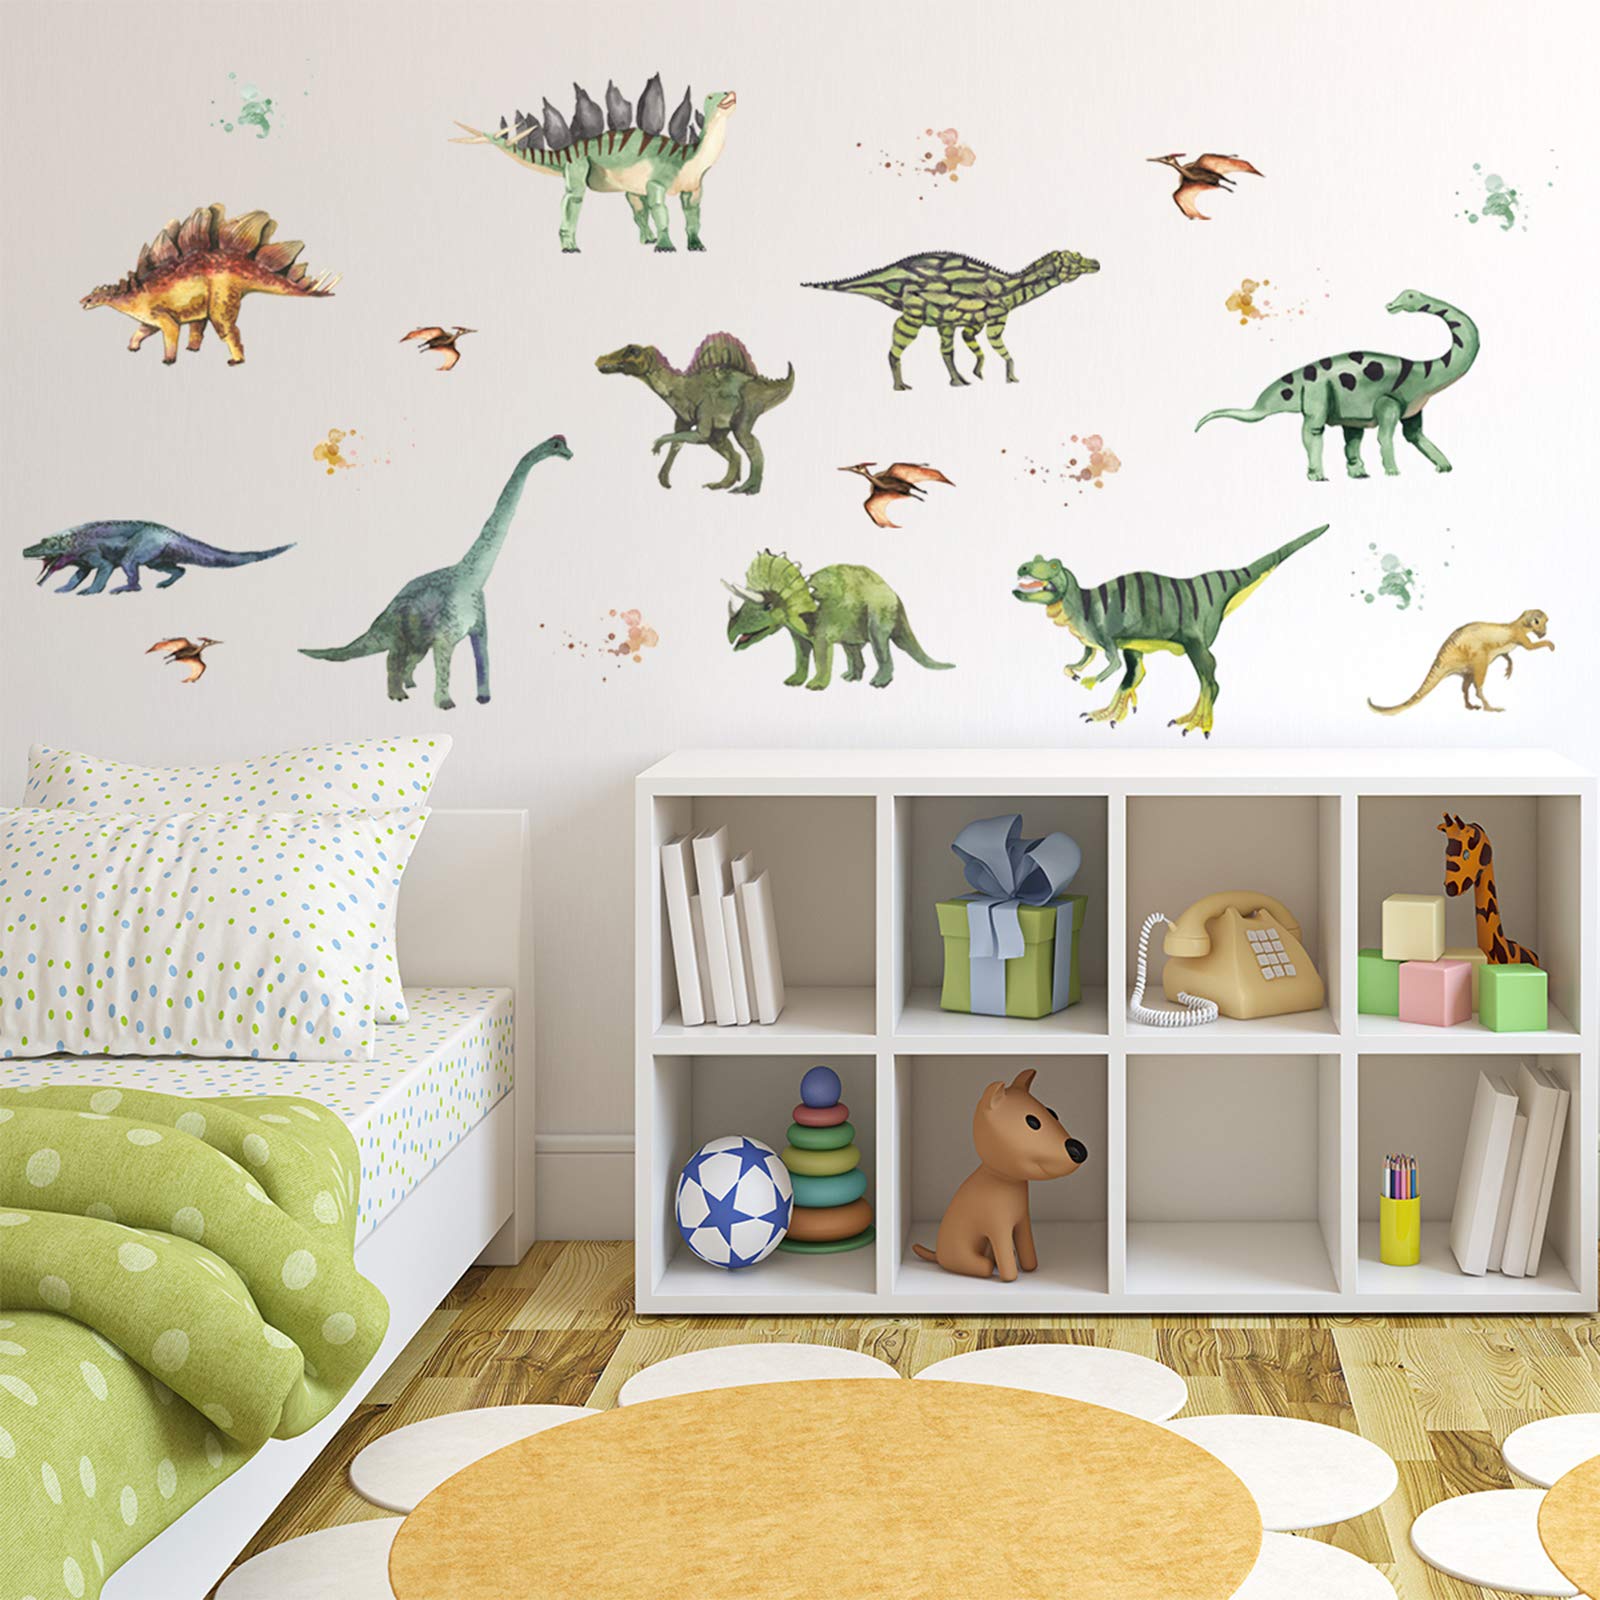 14 Pieces Forest Dinosaurs Wall Stickers Animals Wall Decals, LINYAPRY Removable Peel and Stick Wall Decals, Baby Wall Papers for Classroom Kids Bedroom Bathroom Nursery Home Decoration